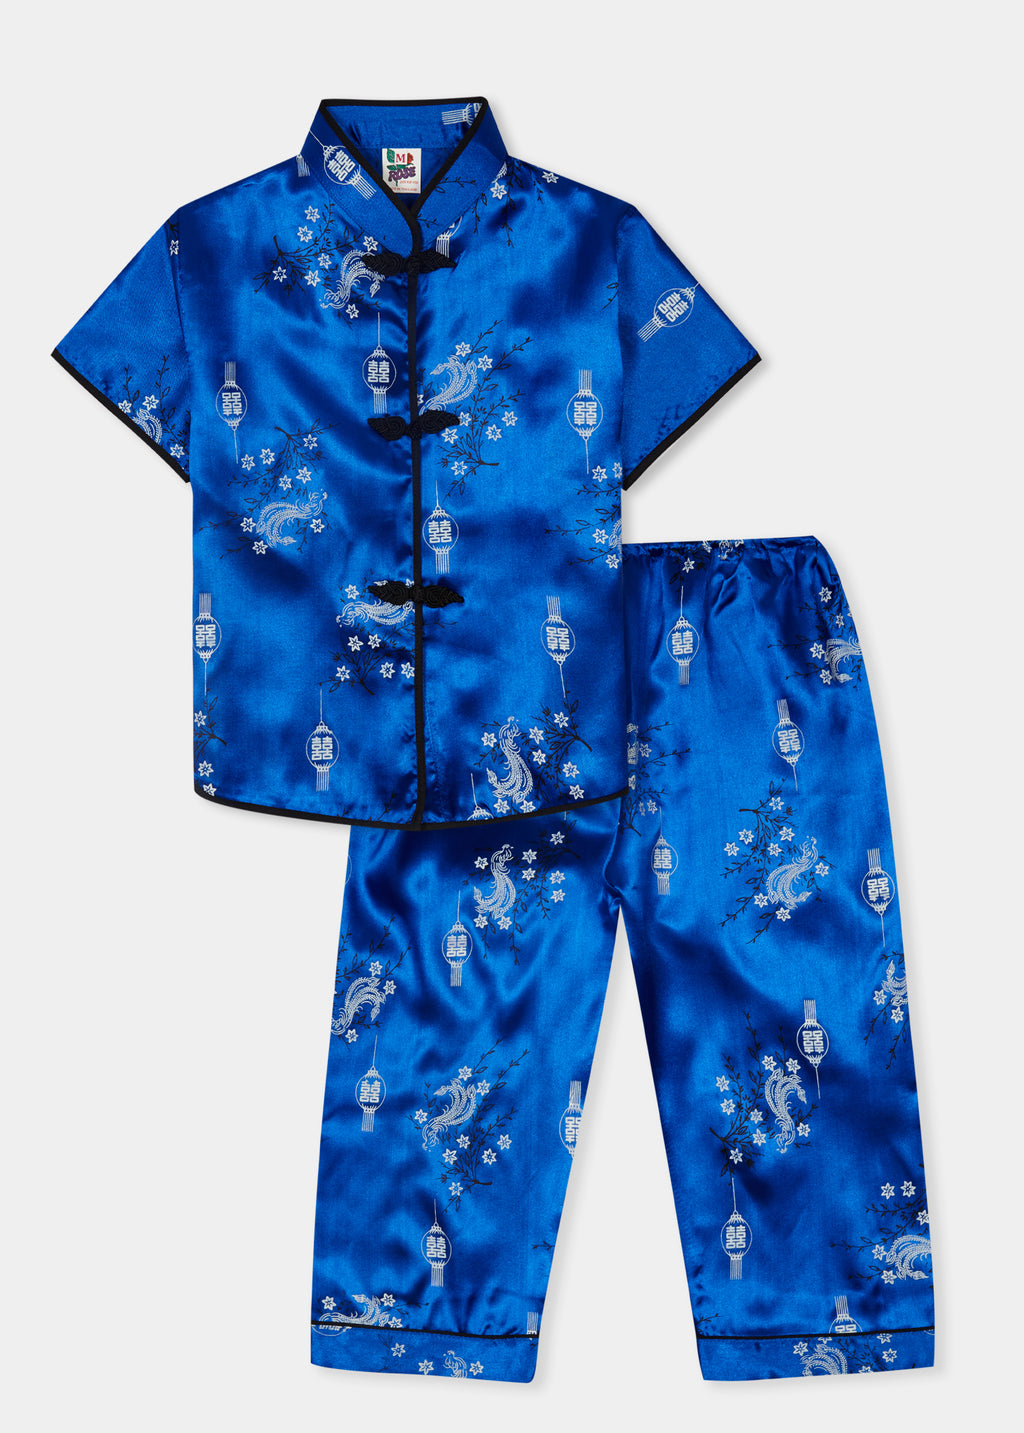 Traditionally styled pyjamas with Chinese features of mandarin collar and flower and knot frog fastenings. Manufactured in rich royal blue silky rayon/polyester with a bird of paradise and Chinese lantern print - a symbol of joy and good fortune. Pyjama top has short sleeves, contrast bound mandarin collar and centre front opening which closes with flower and knot frog fastenings. Elasticated waist pyjama bottoms with contrast piped hem cuffs